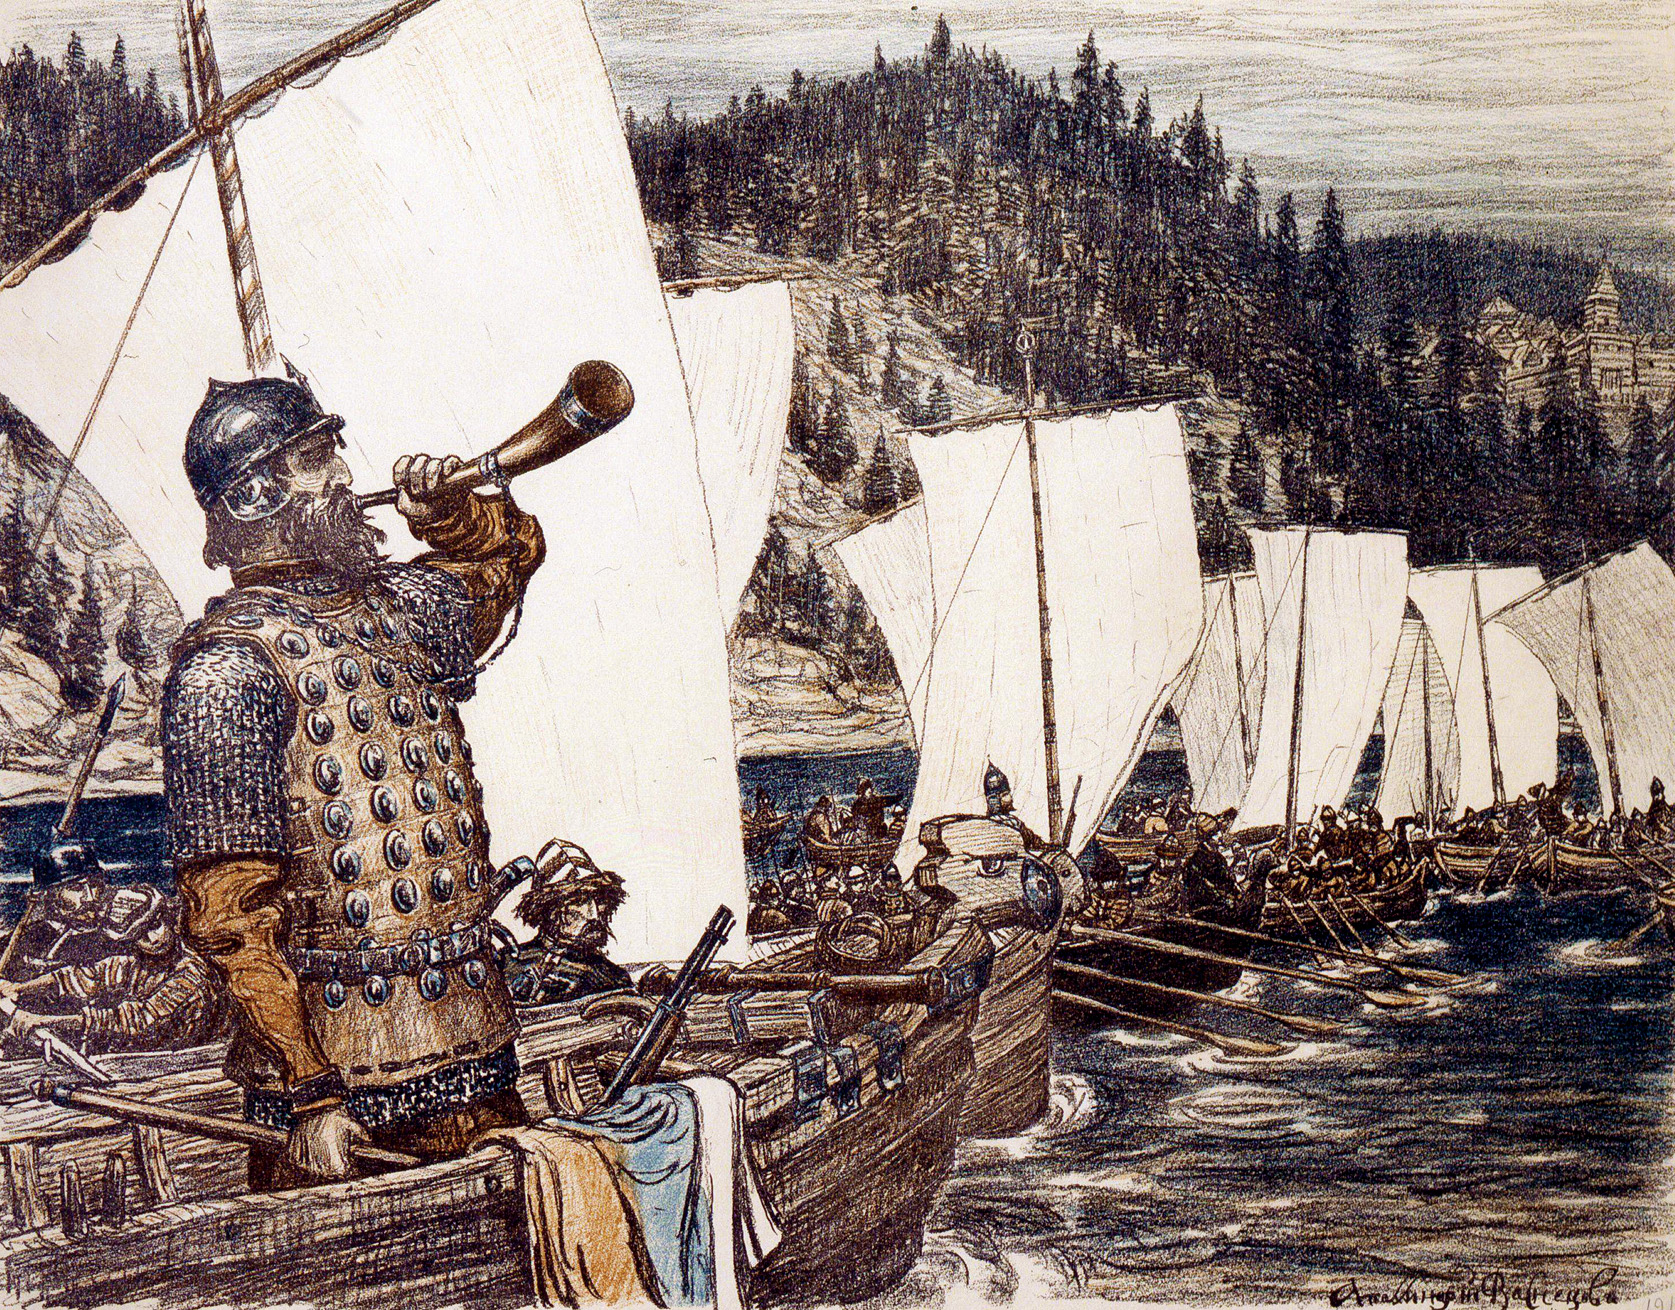 The Stroganov’s outfitted the Cossack explorers with boats to transport their supplies and equipment as they set off in autumn 1582 into the river network of the Ural Mountains. 